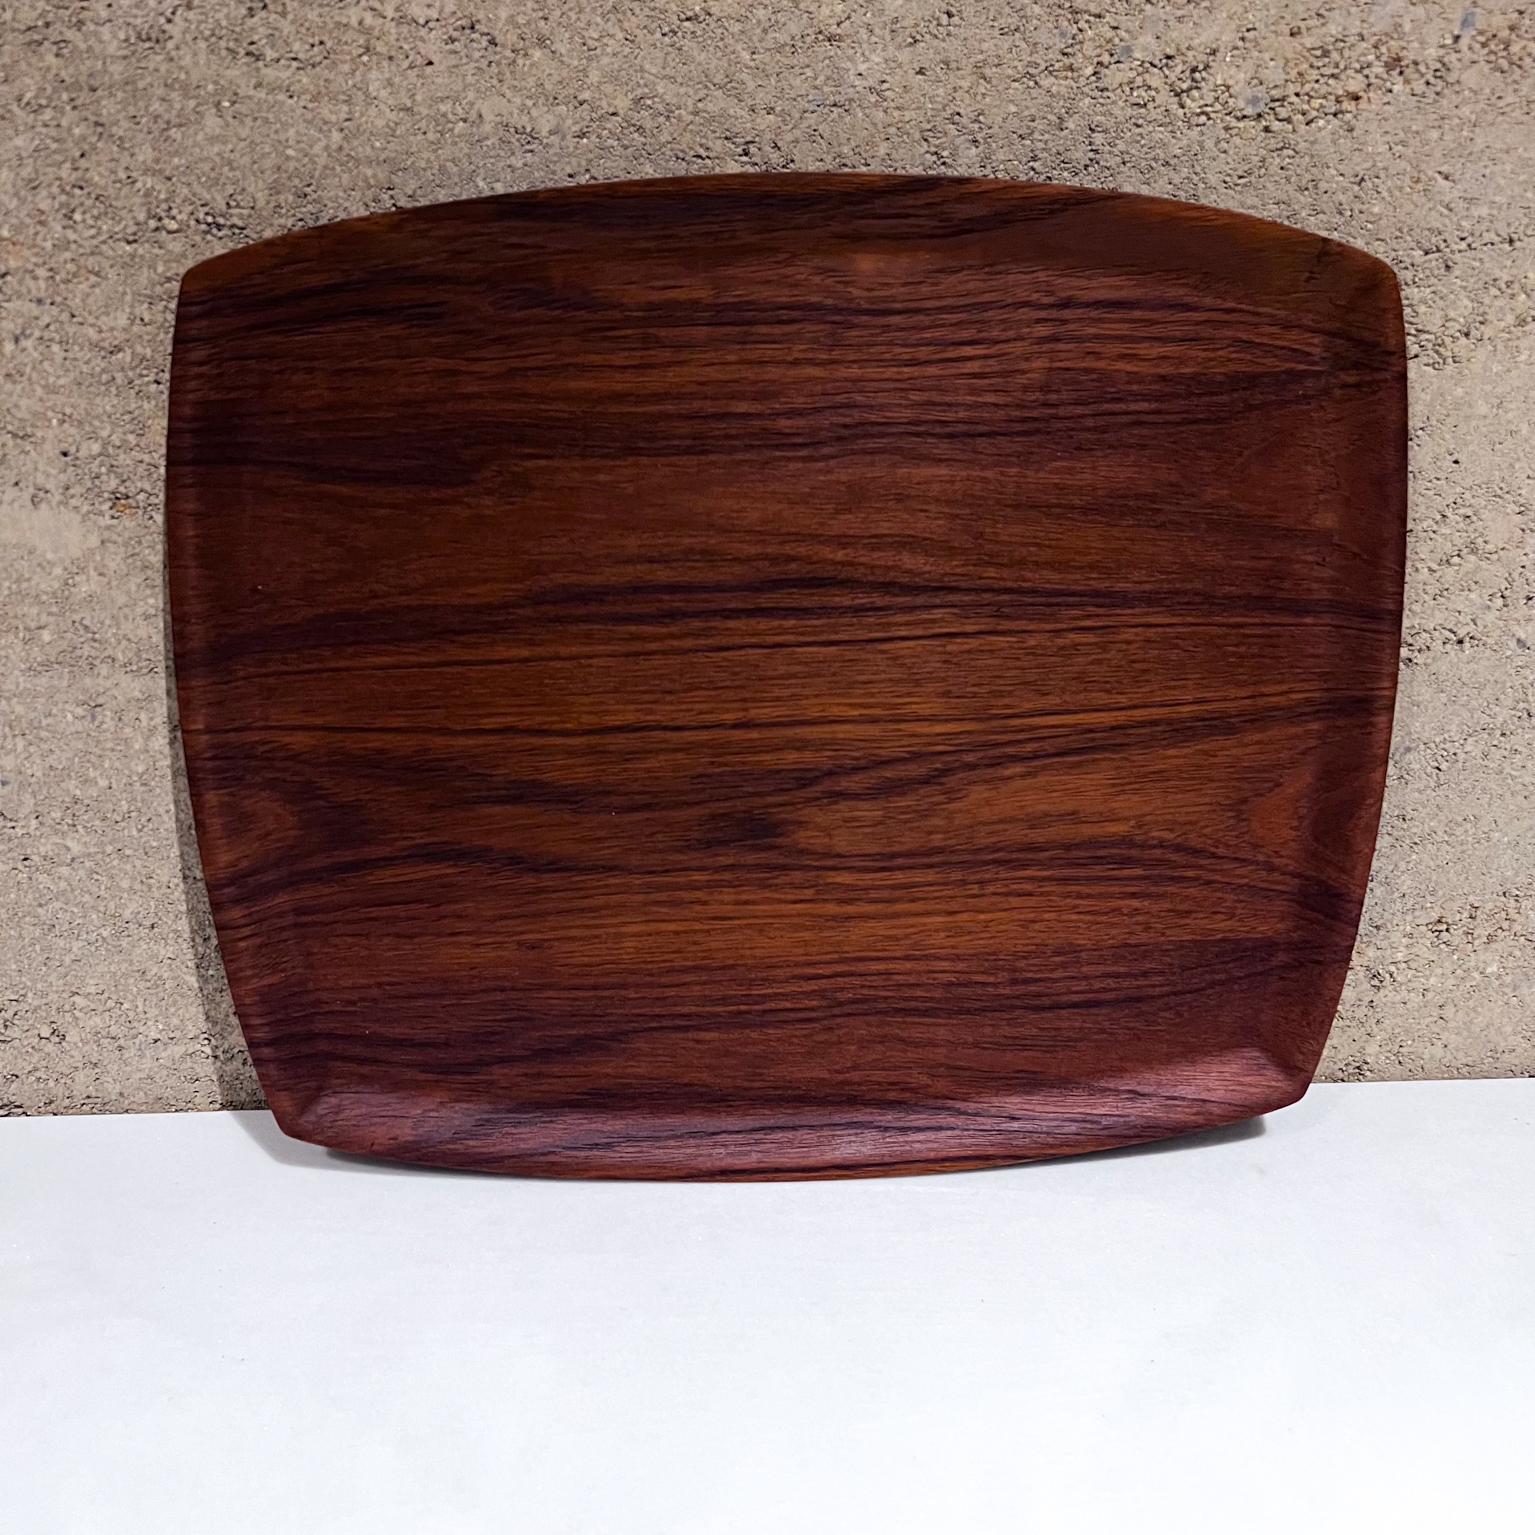 Mid-20th Century 1960s Wood Teak Tray from Sweden Style Jens Quistgaard For Sale